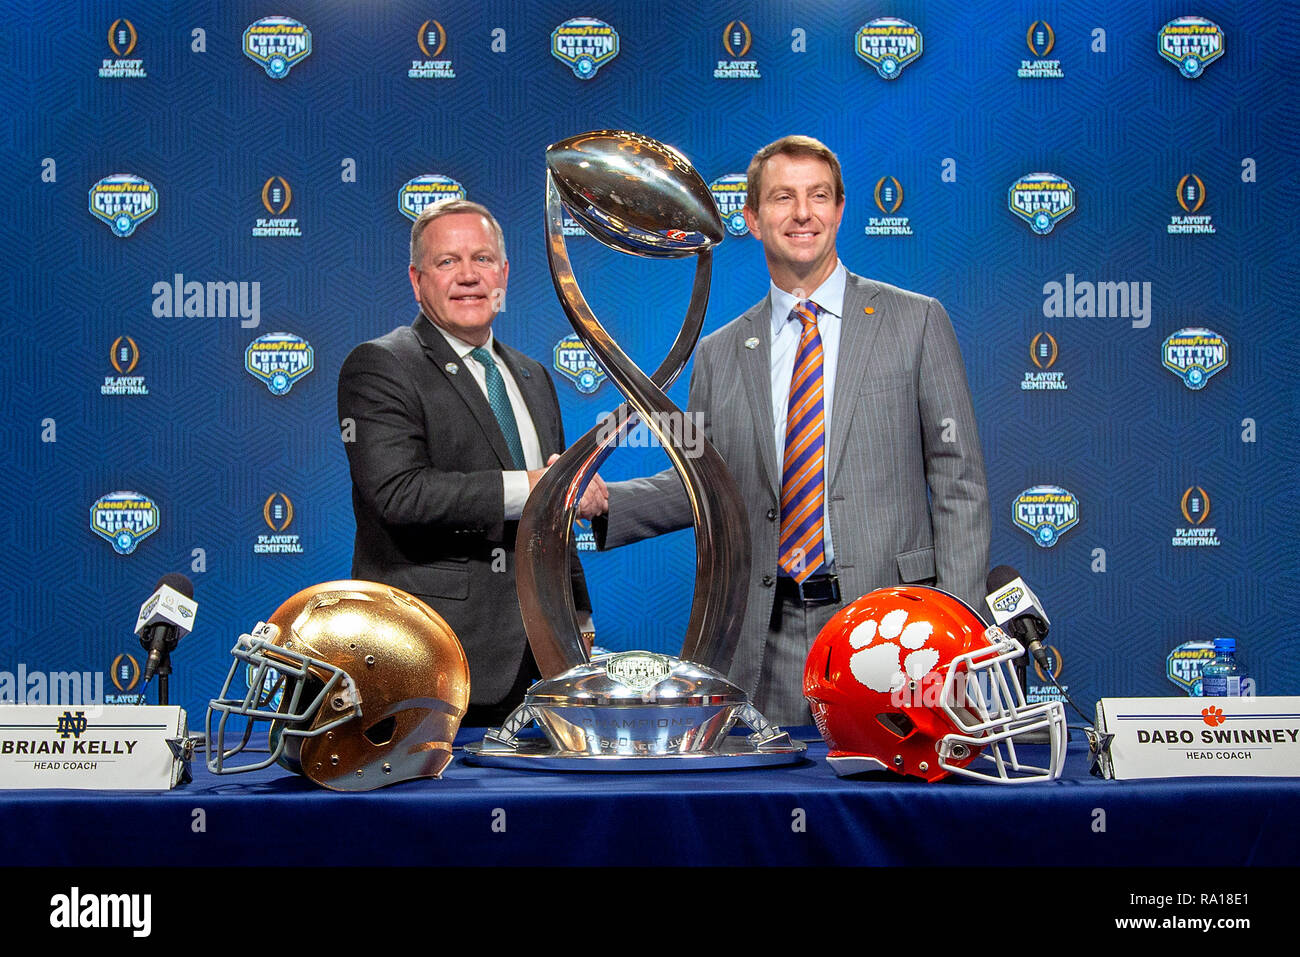 Arlington, Texas, USA. 28th Dec, 2018. Notre Dame head coach Brian Kelly and Clemson head coach Dabo Swinney at the coaches press conference prior to NCAA Football game action between the Notre Dame Fighting Irish and the Clemson Tigers at AT&T Stadium in Arlington, Texas. John Mersits/CSM/Alamy Live News Stock Photo